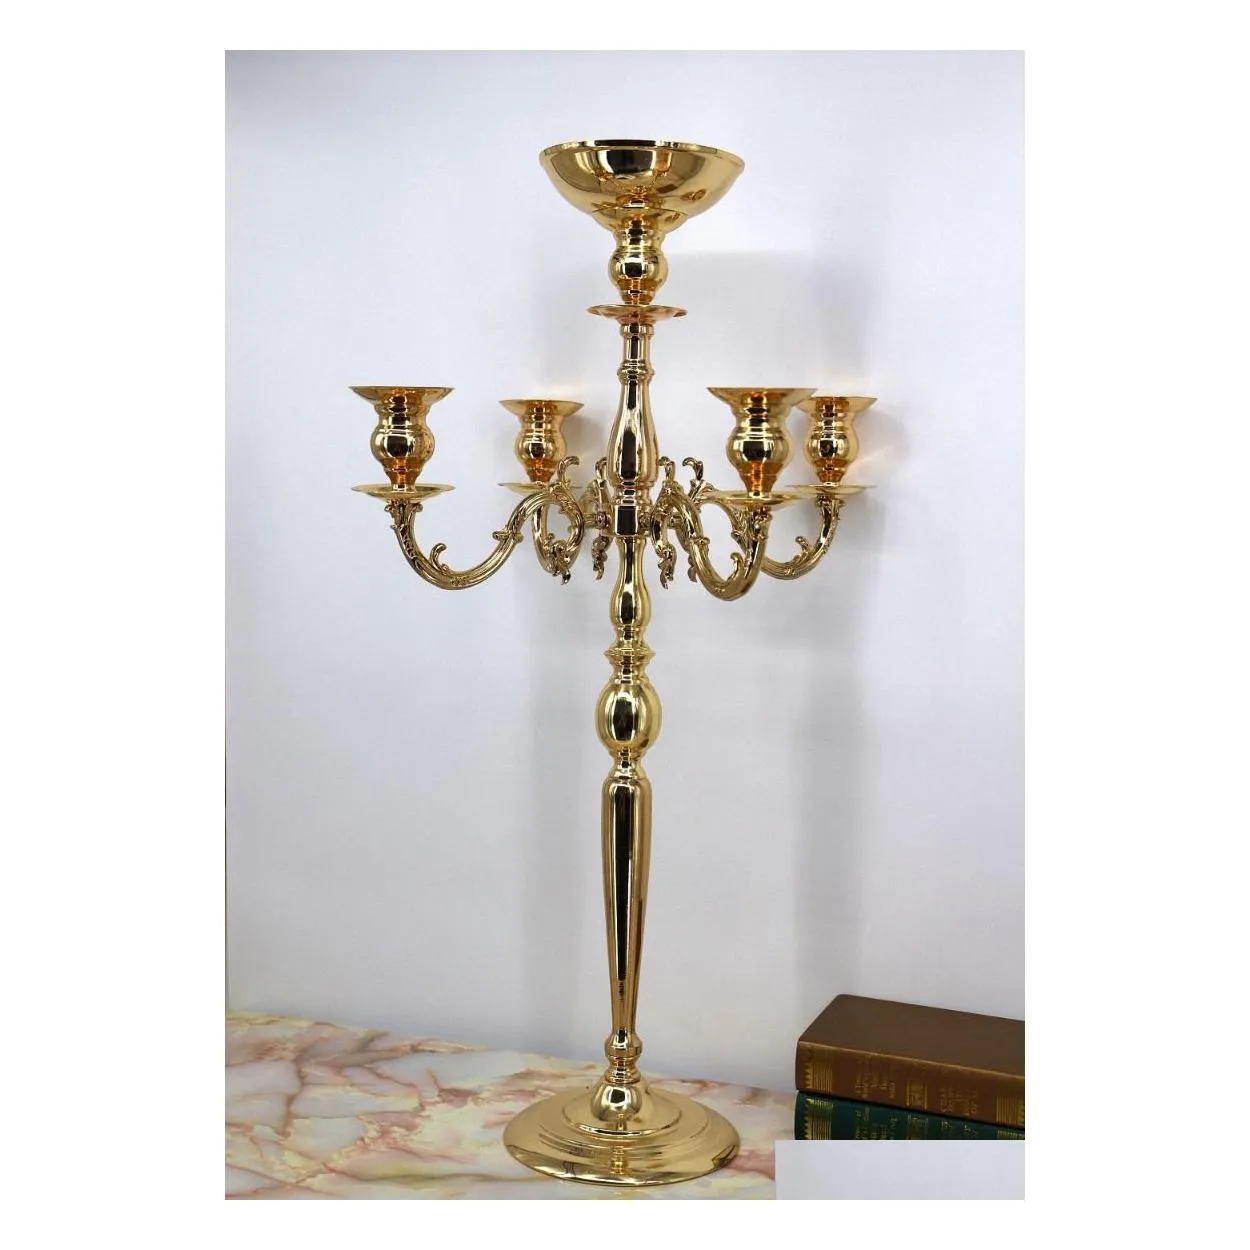 Party Decoration 85 cm Tall Metal 5 Arm Candelabra With Flower Bowl Candle Holder Rack Wedding Table Centerpiece Decorations Iron Va Dhieb